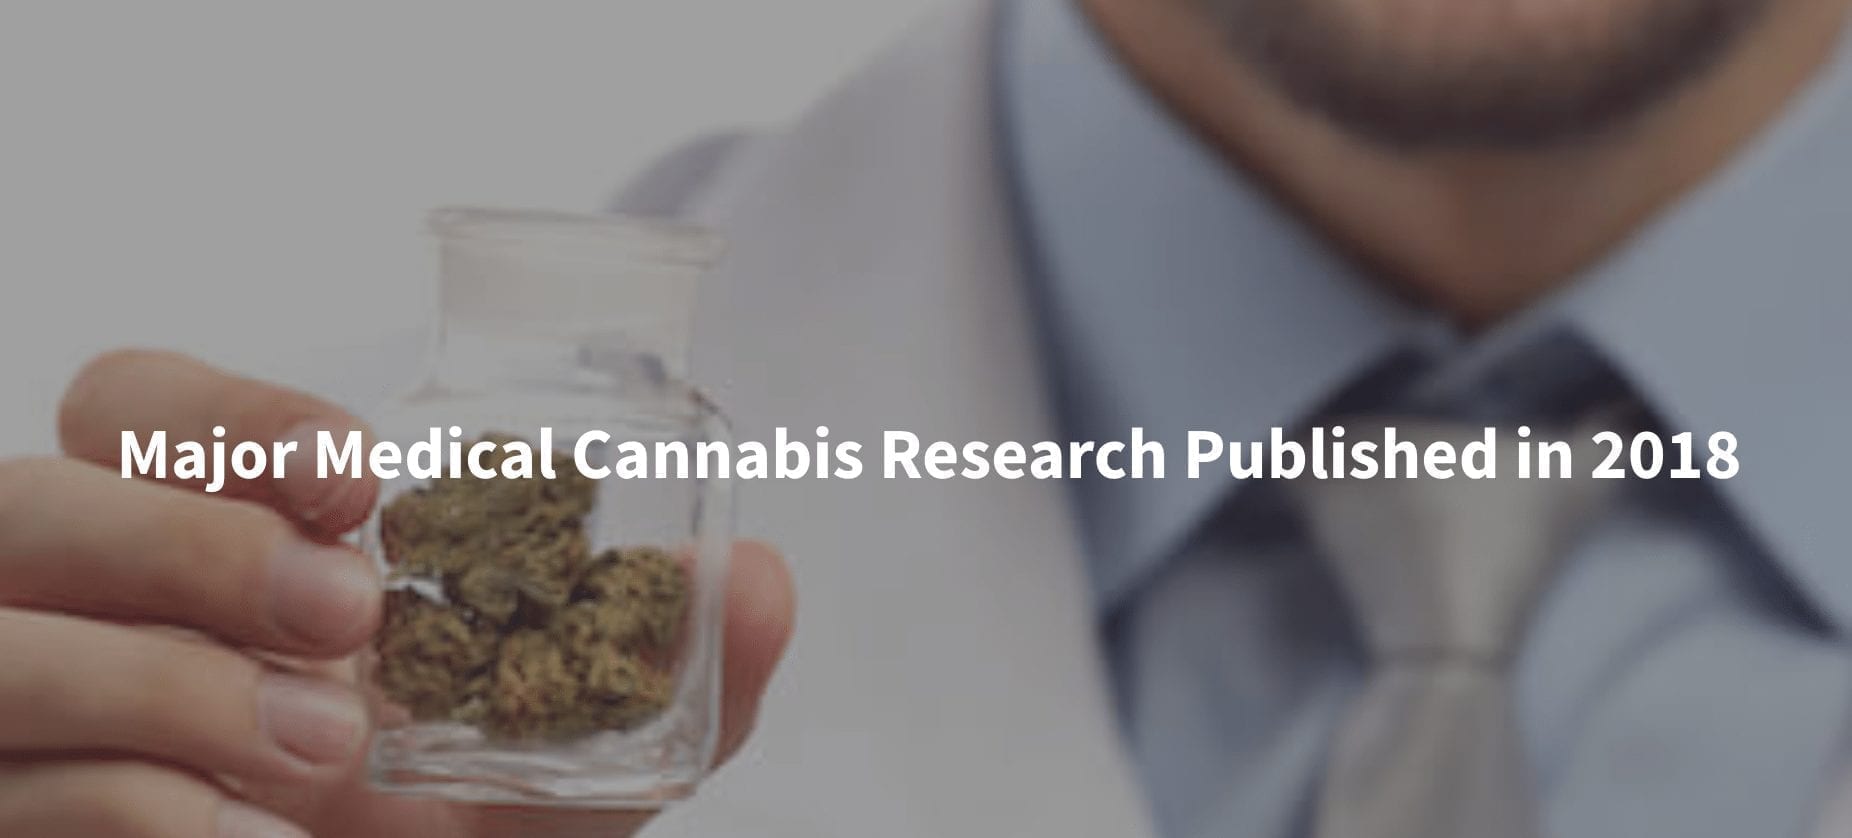 Major Medical Cannabis Research Published in 2018